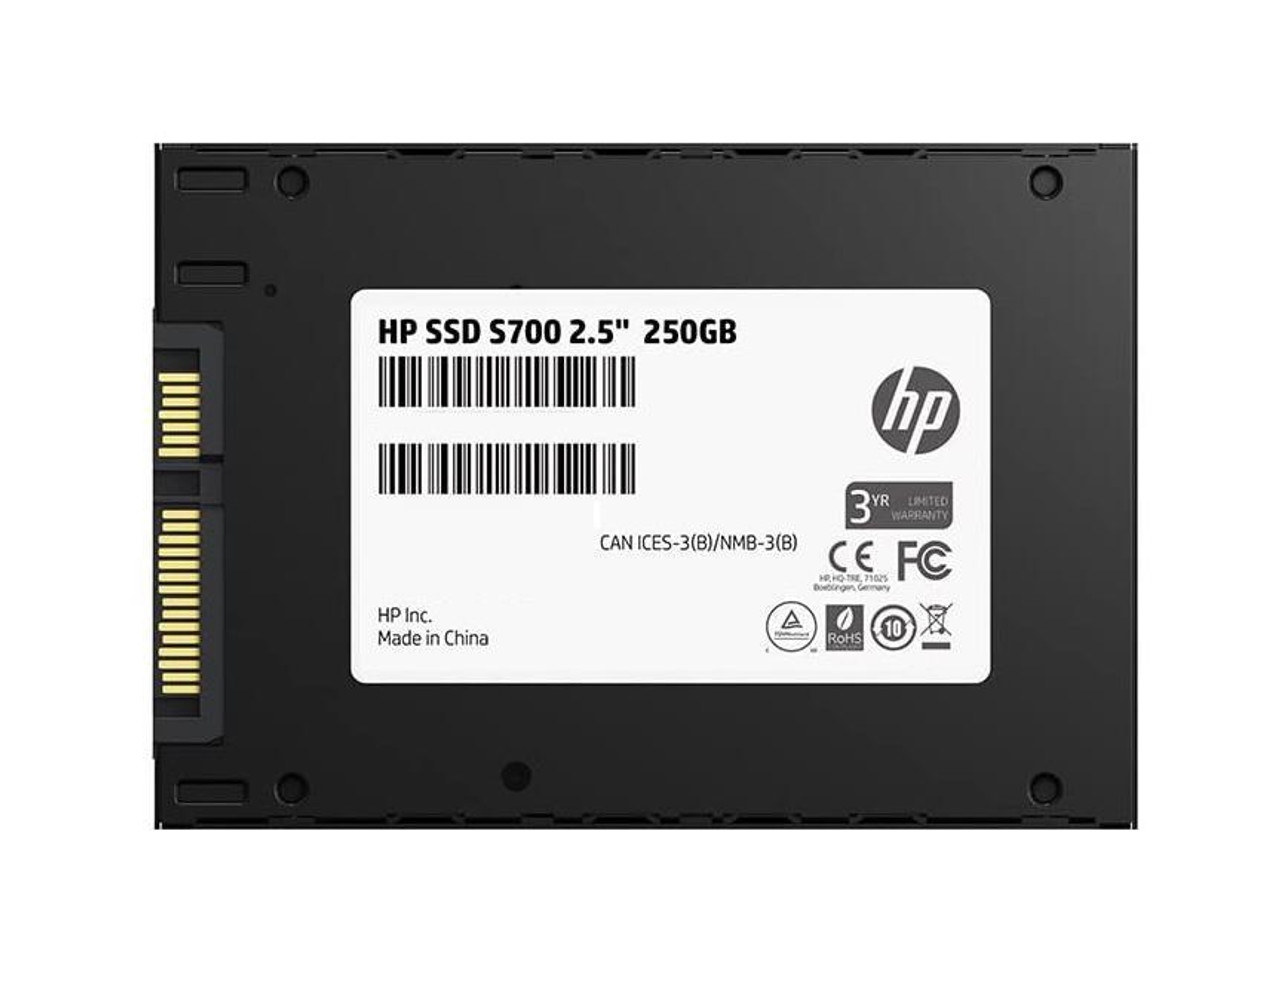 2DP98AA HP 250GB SATA 6Gbps 2.5-inch Internal Solid State Drive (SSD)